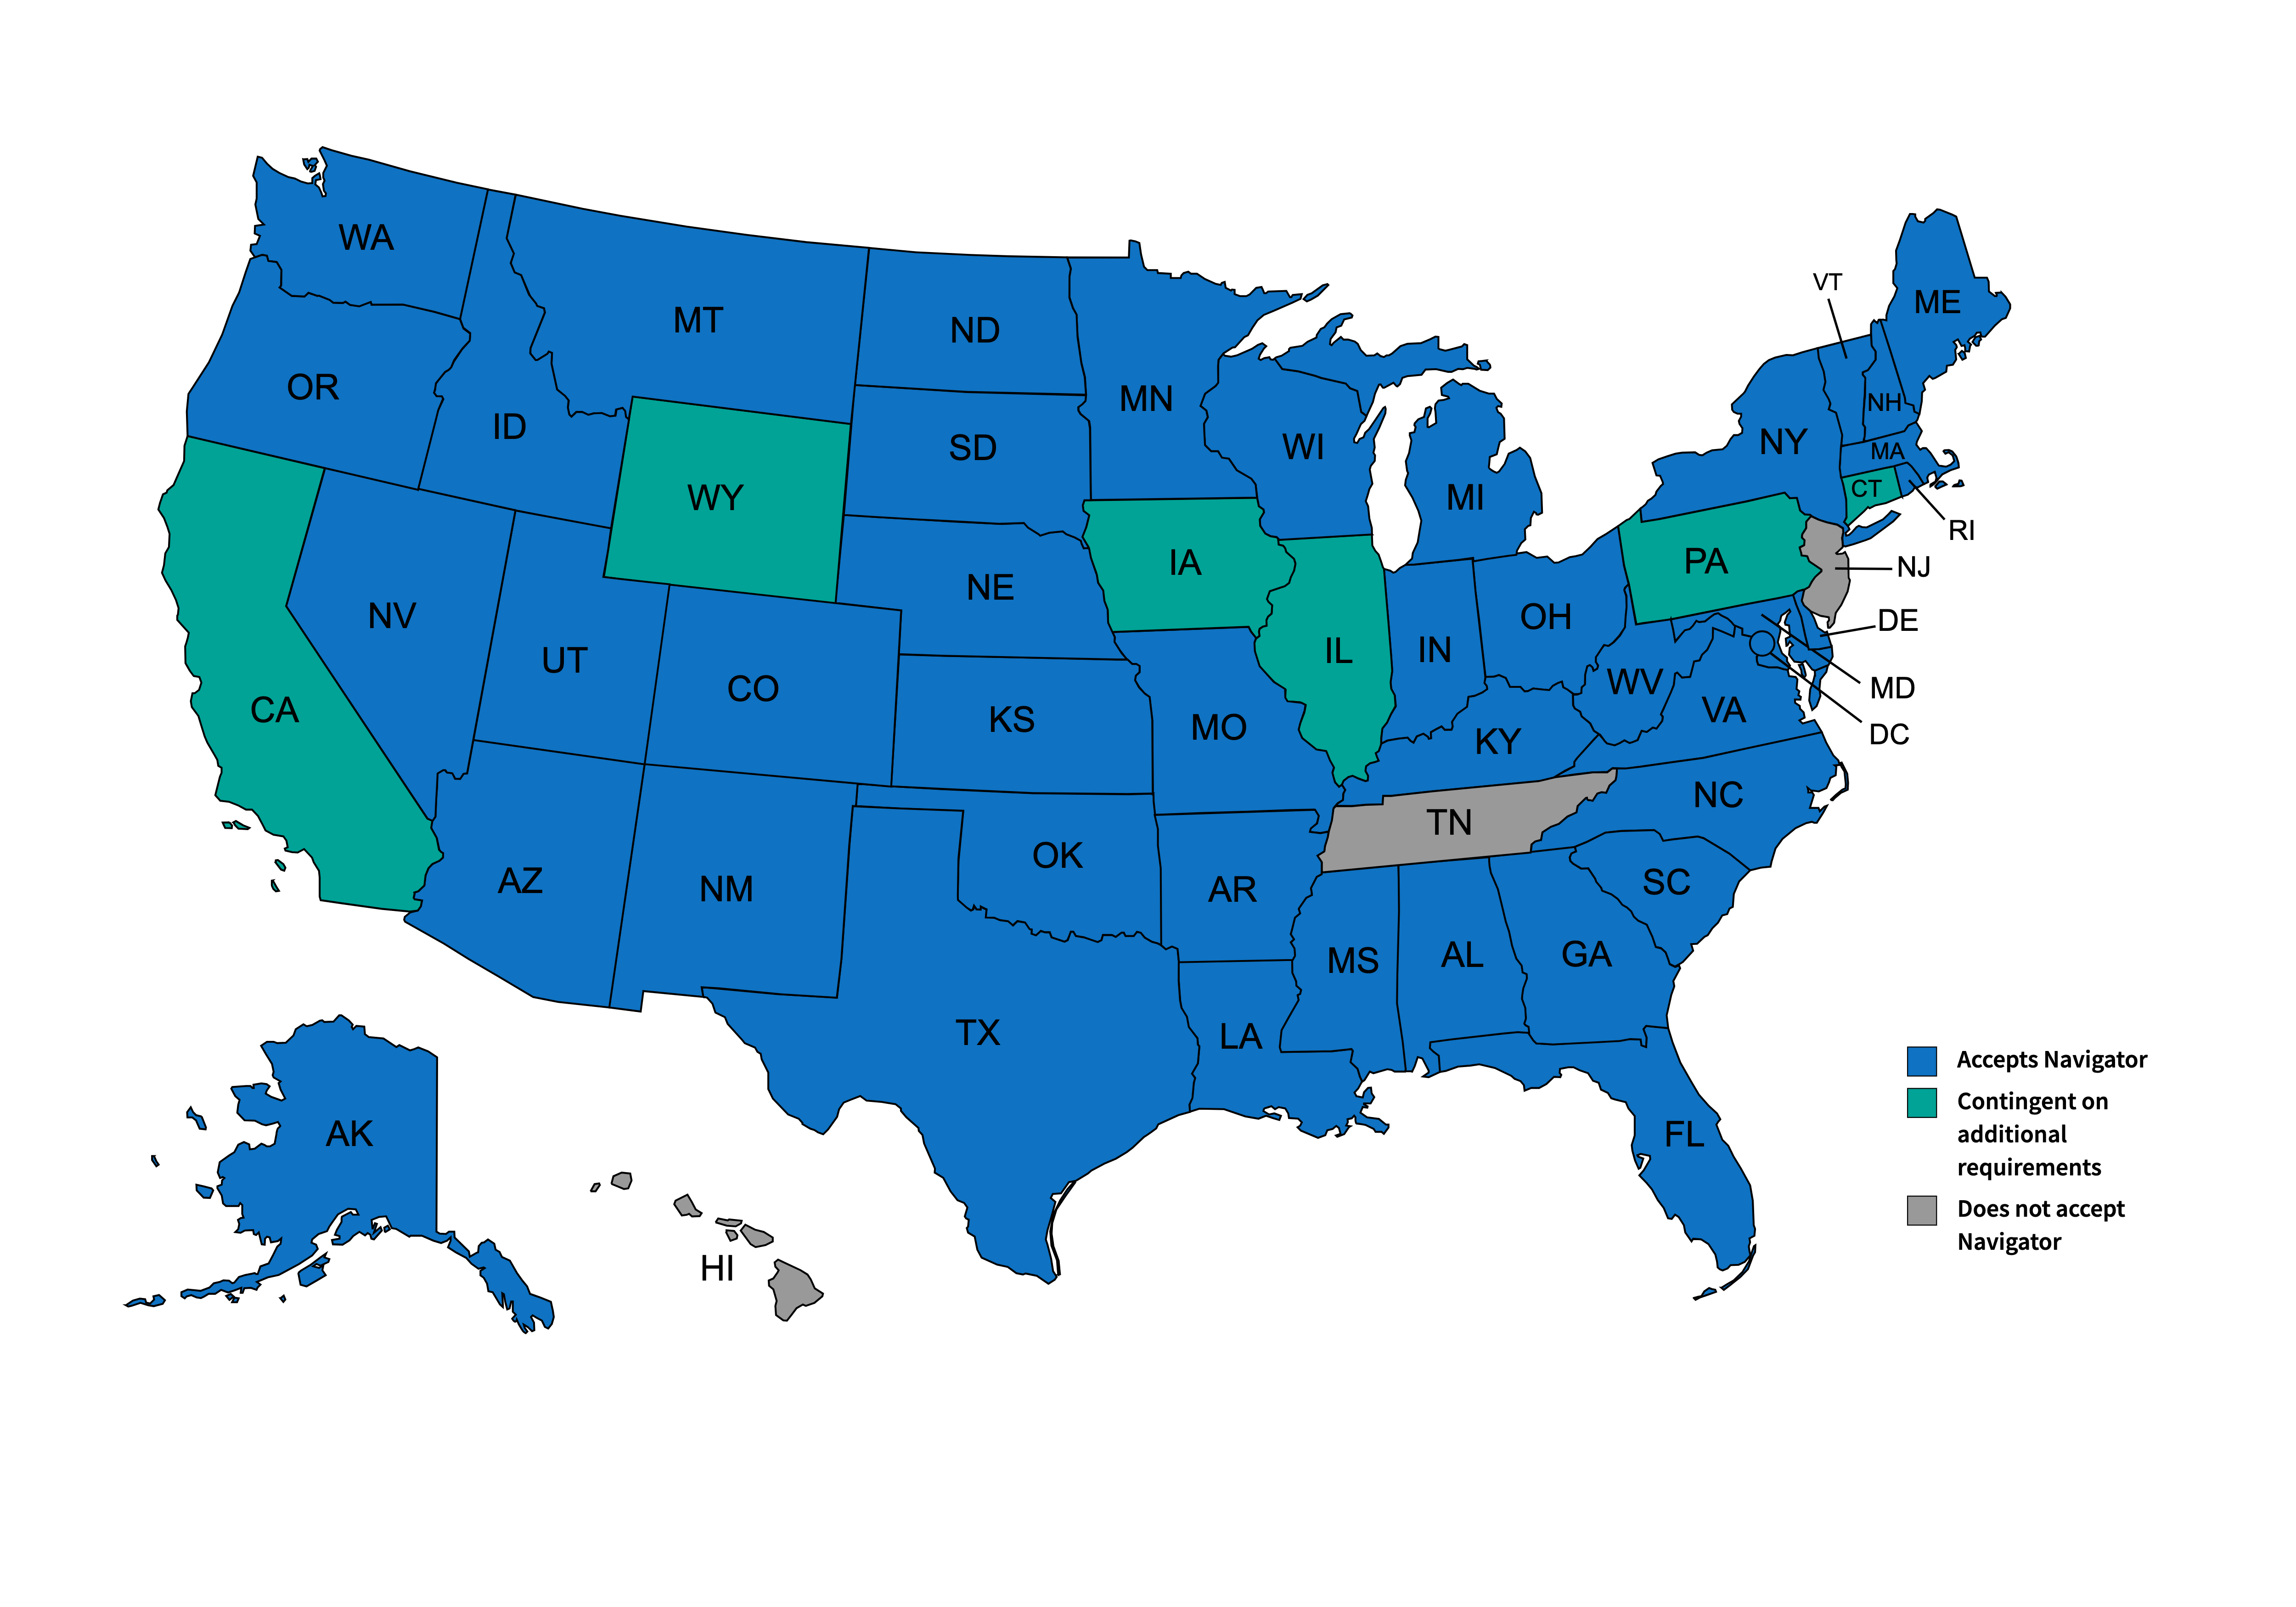 U.S. map with states that accept Navigator colored in. All states colored in except Hawaii, New Jersey, and Tennessee.